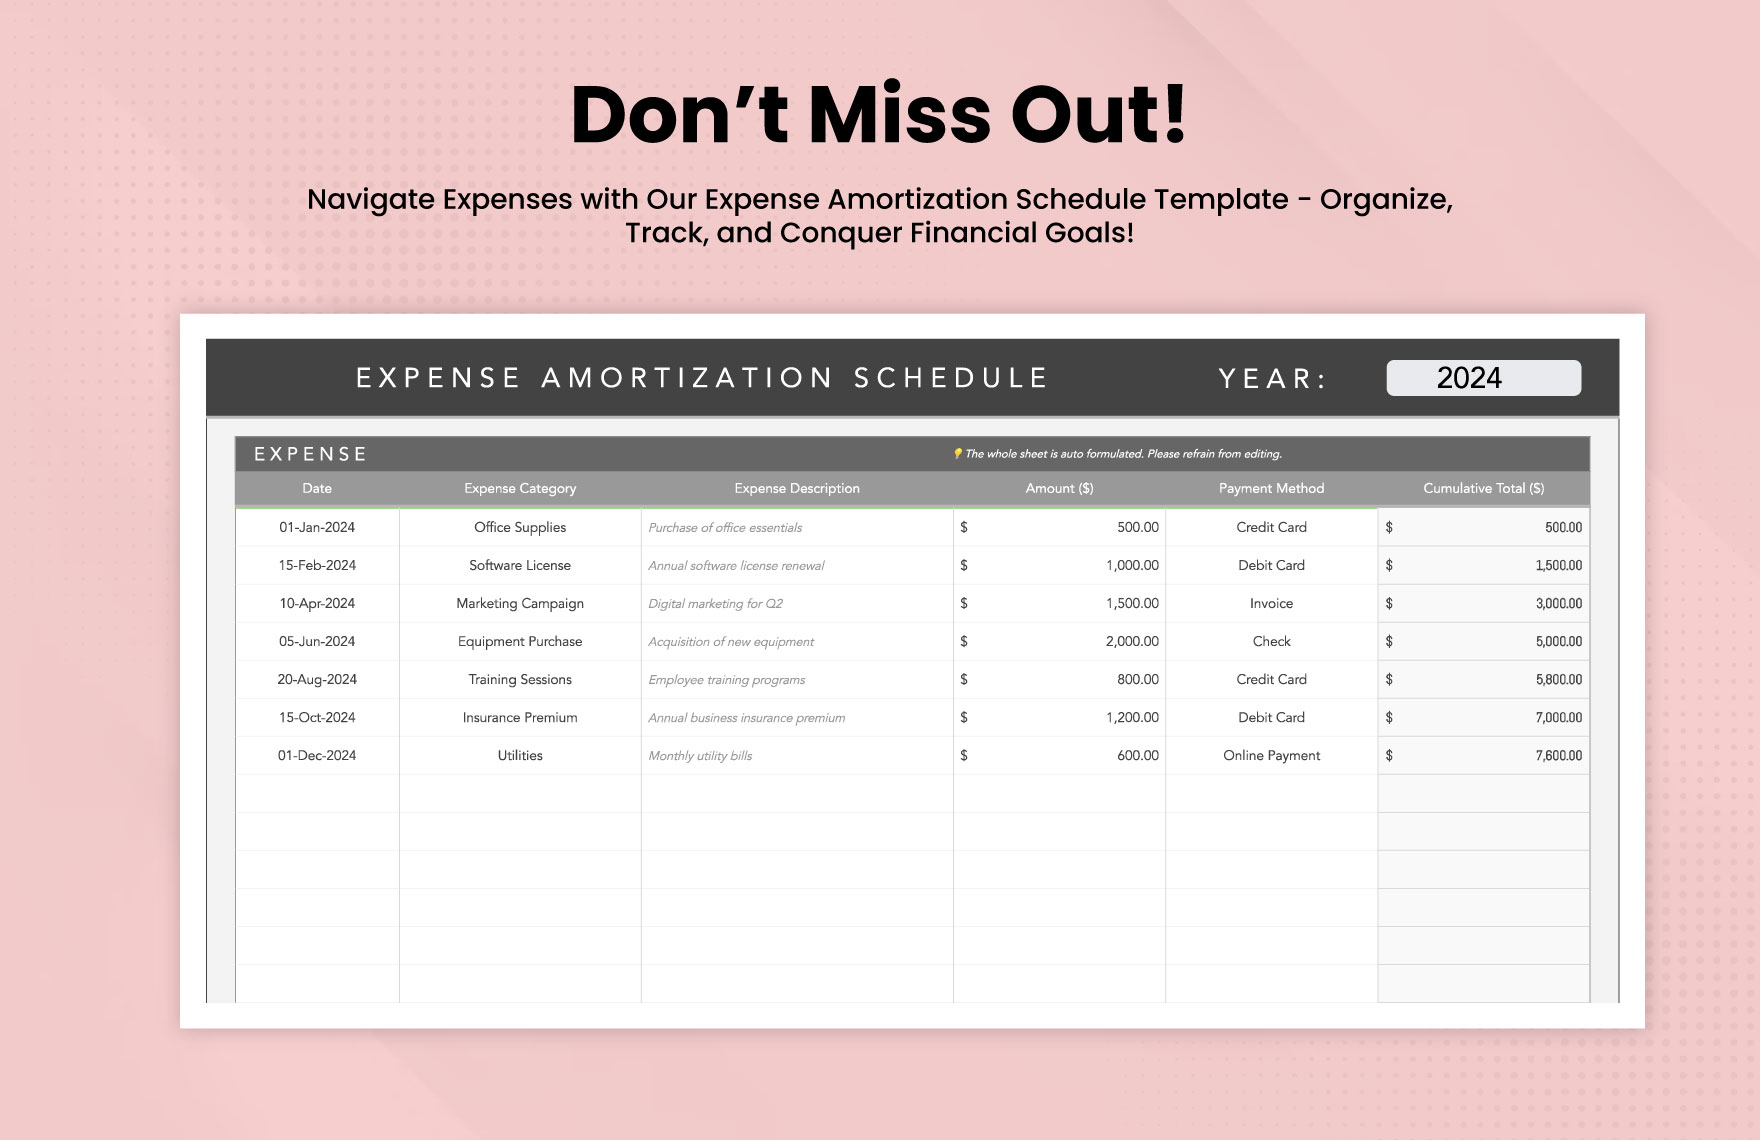 Expense Amortization Schedule Template